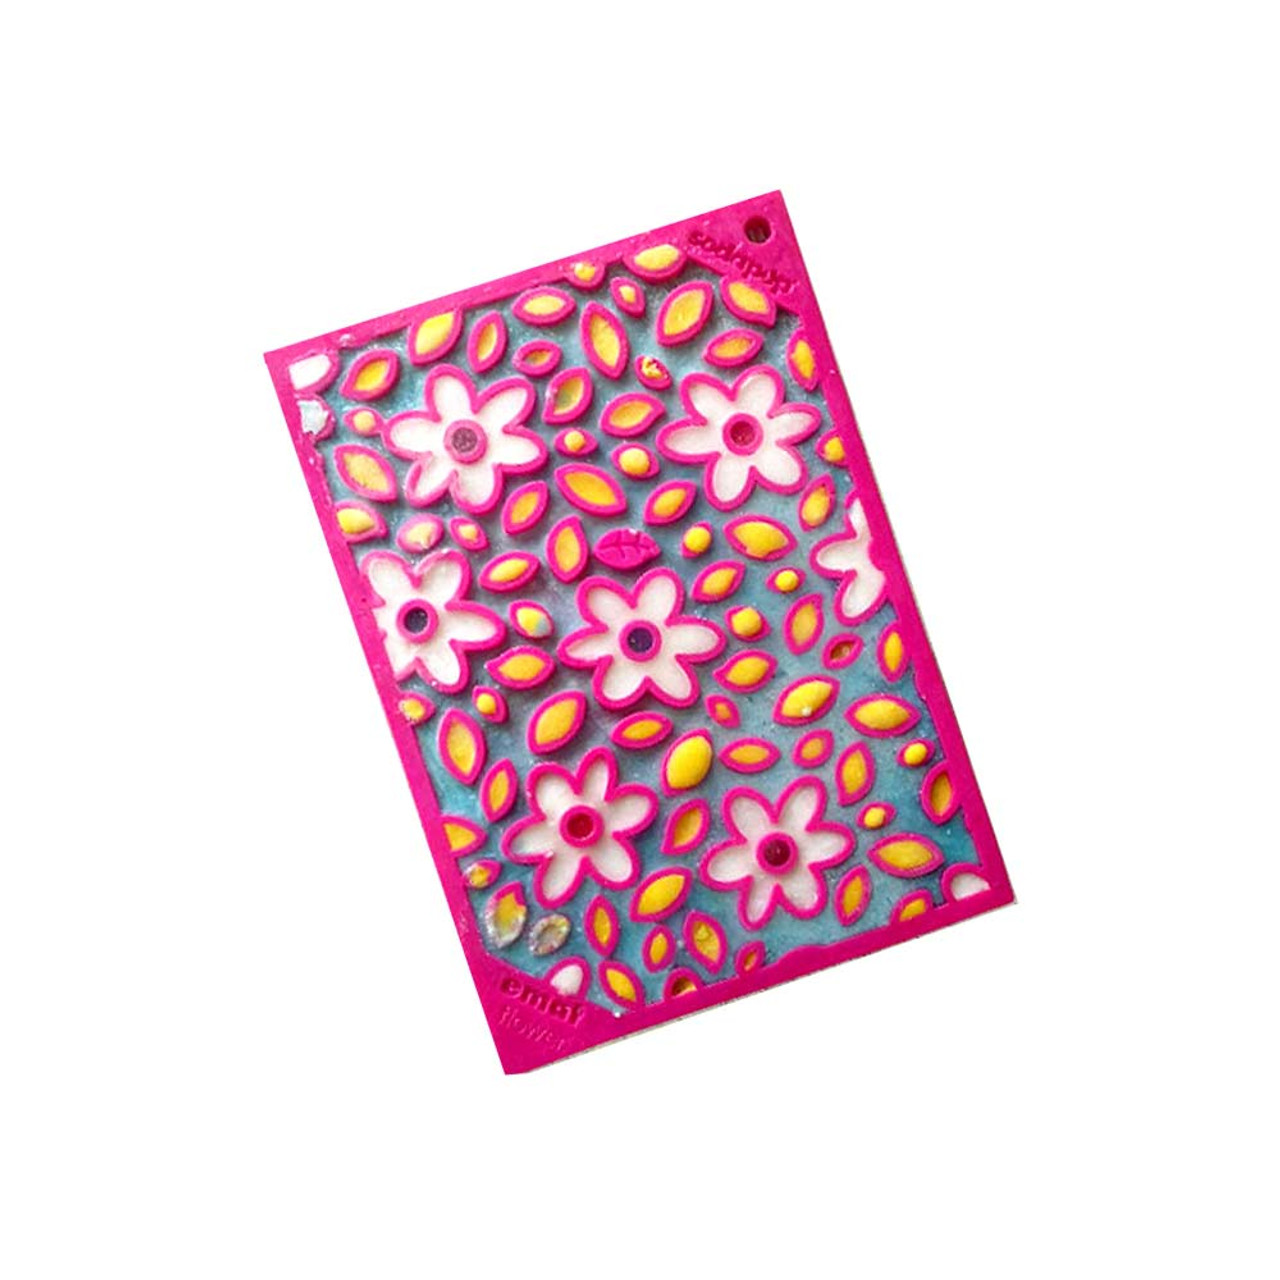 SODA PUP, Flower Power Lick Mat (Made in the USA)